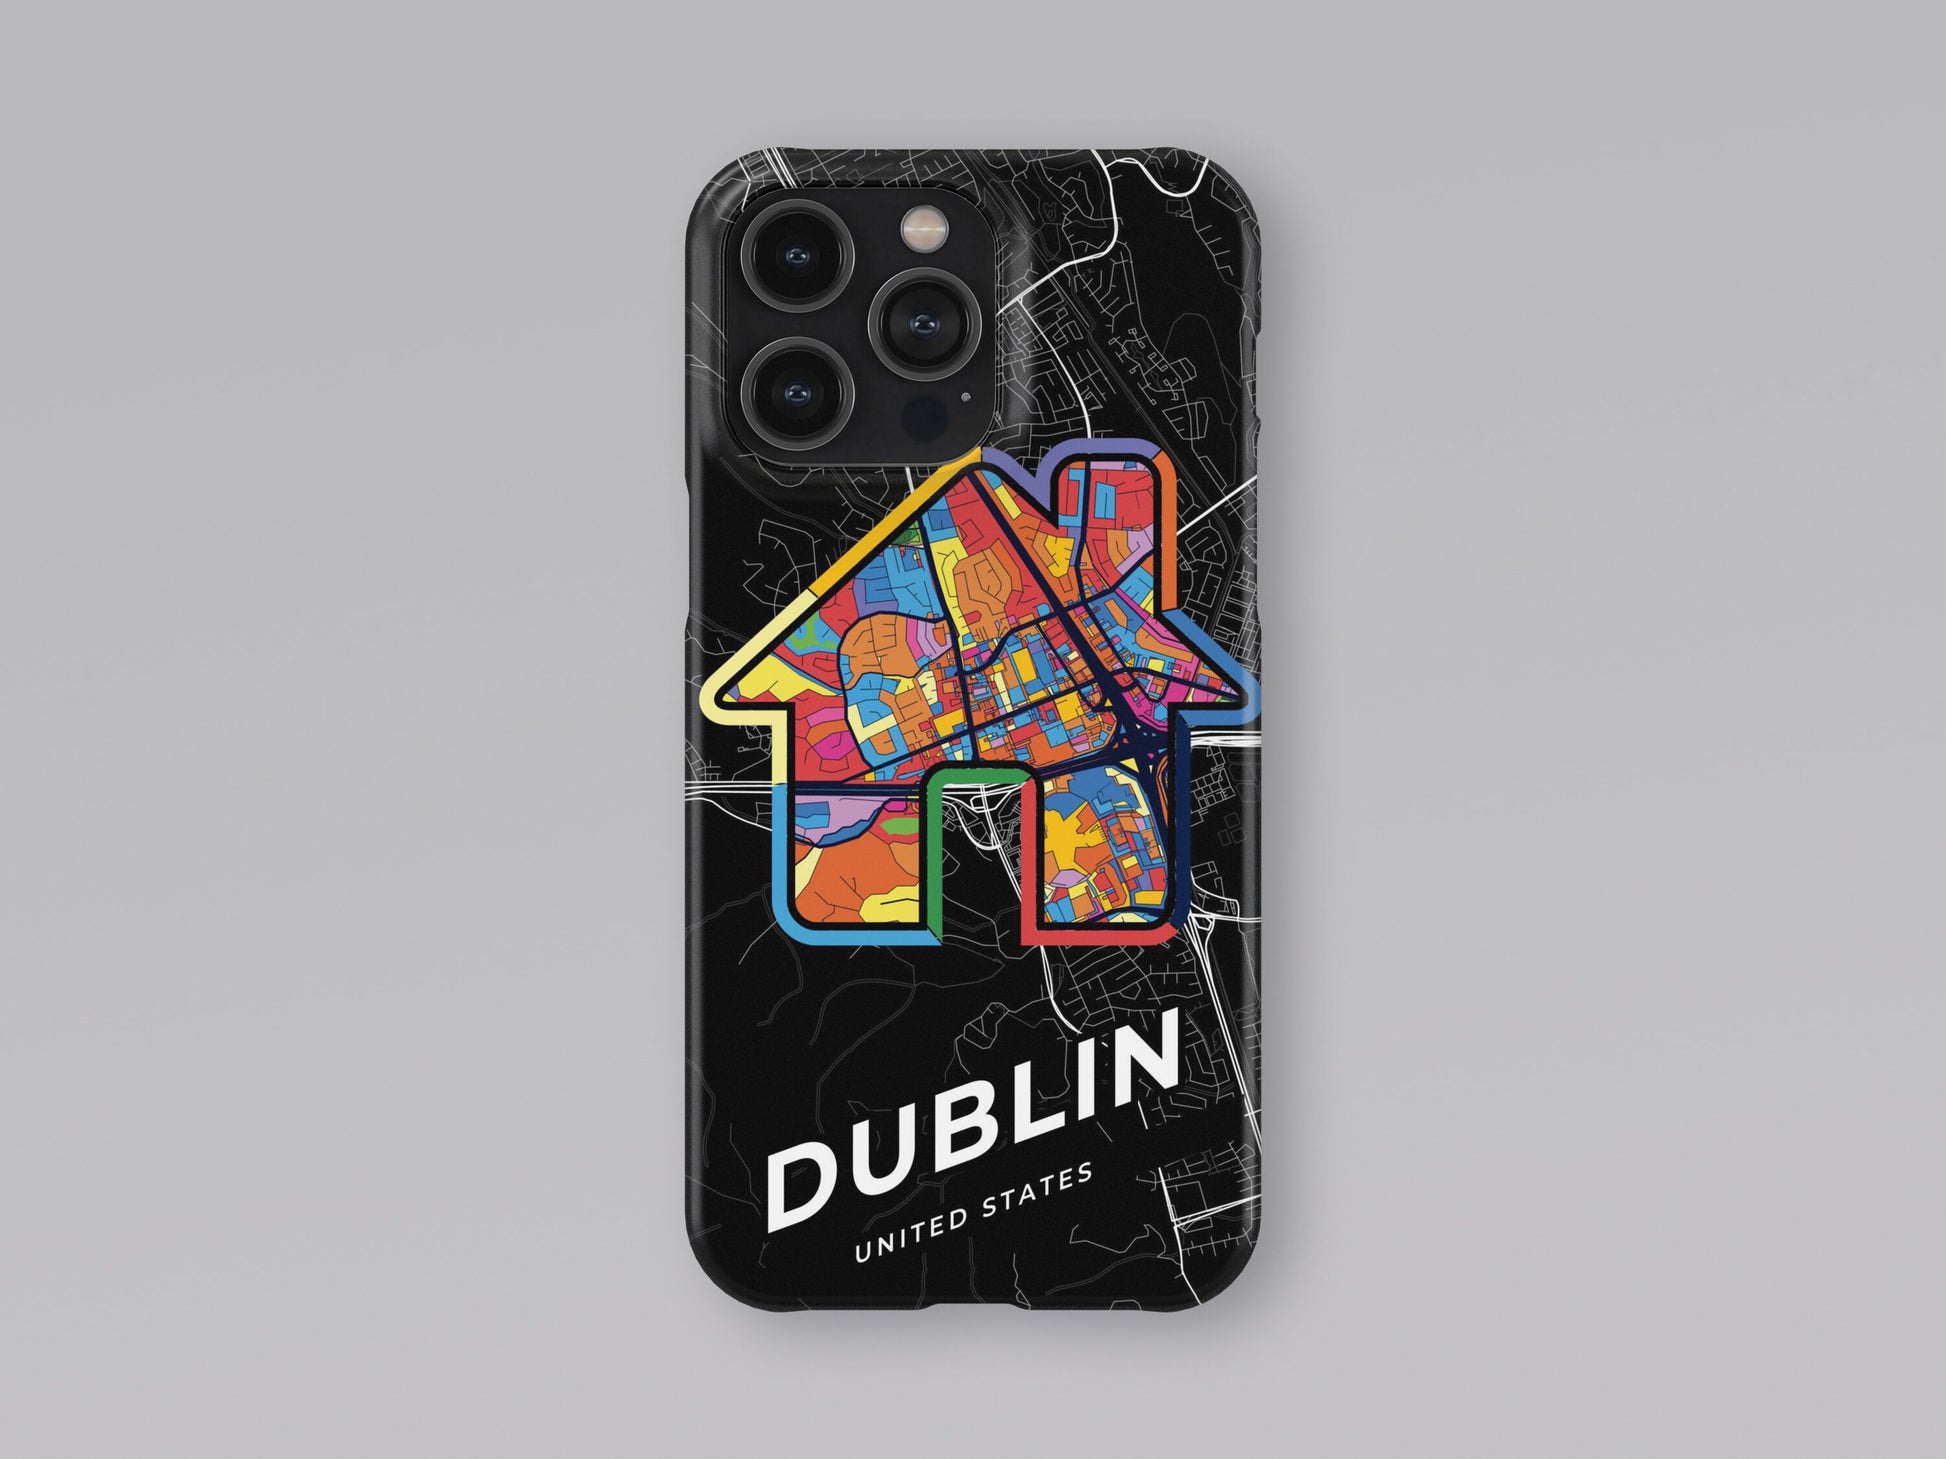 Dublin California slim phone case with colorful icon. Birthday, wedding or housewarming gift. Couple match cases. 3